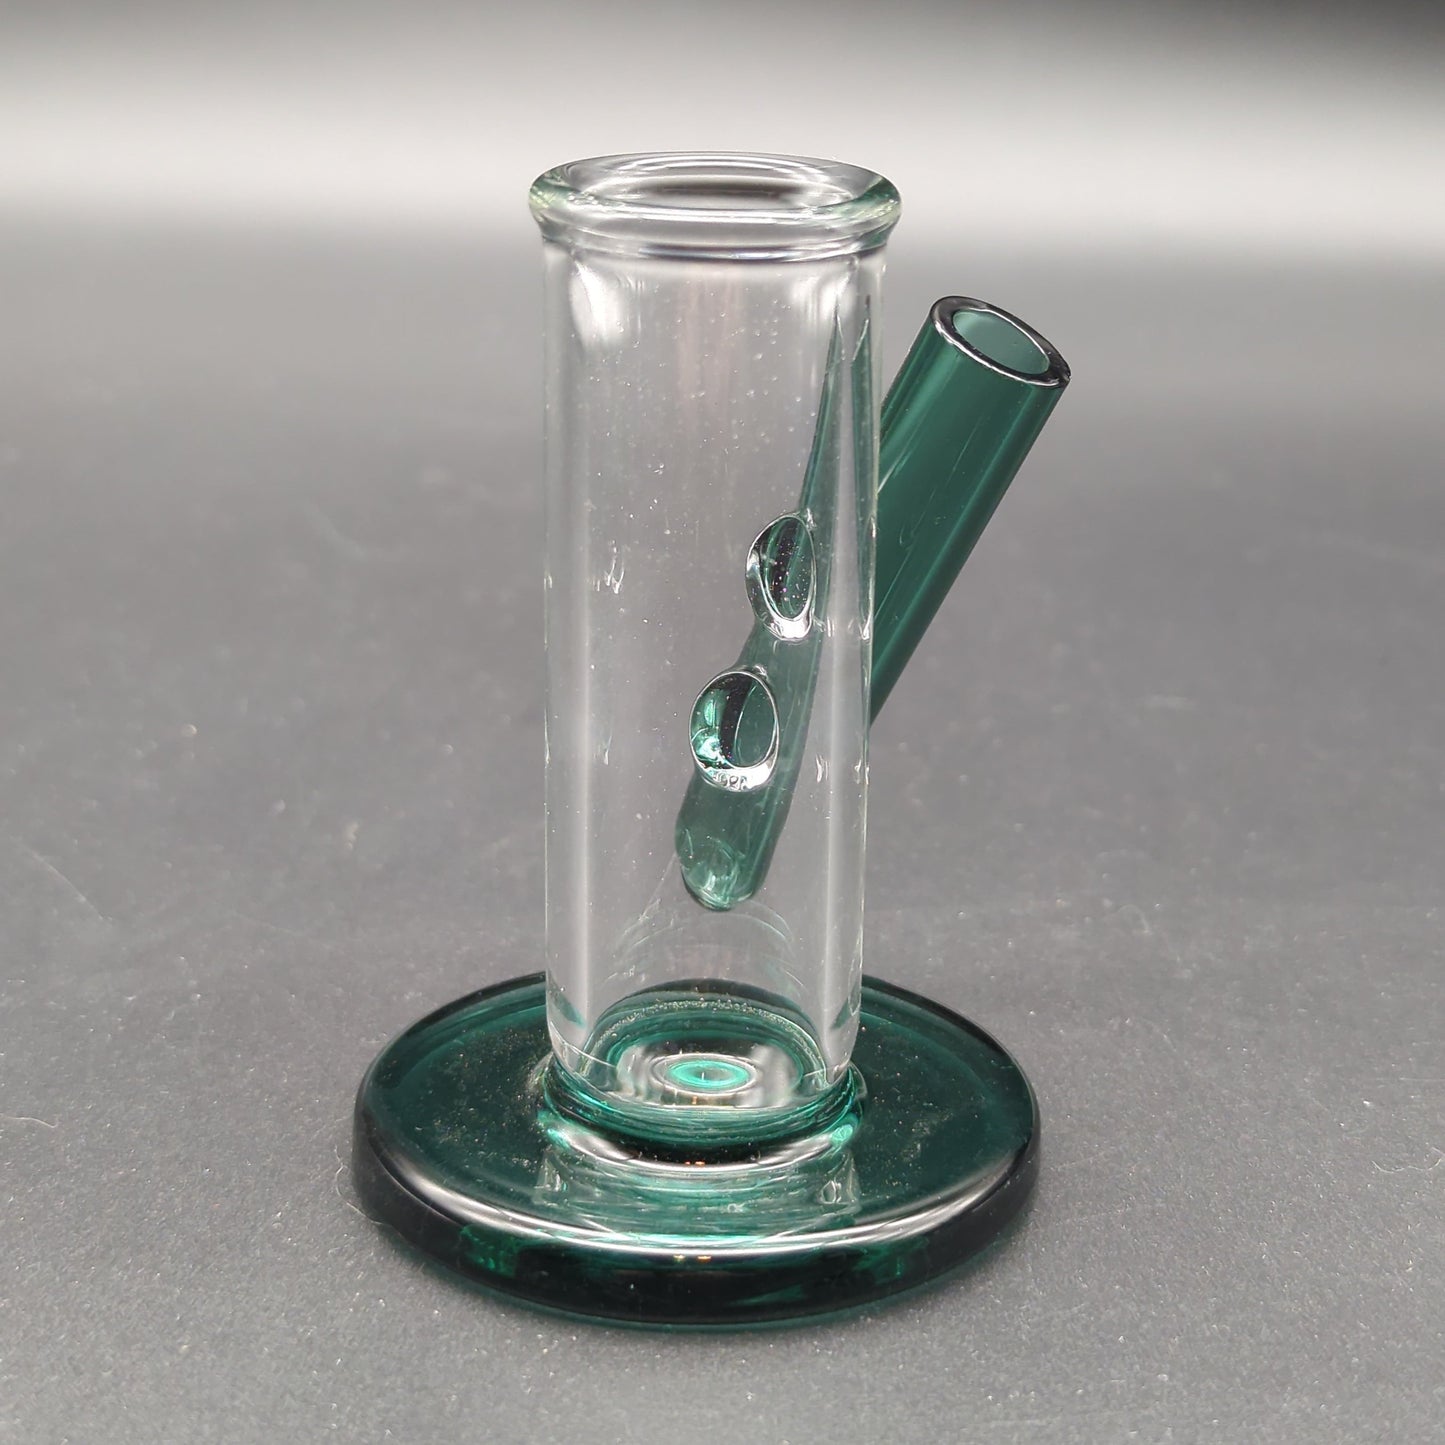 Carb Cap and Dab Tool Stand - 3" Teal